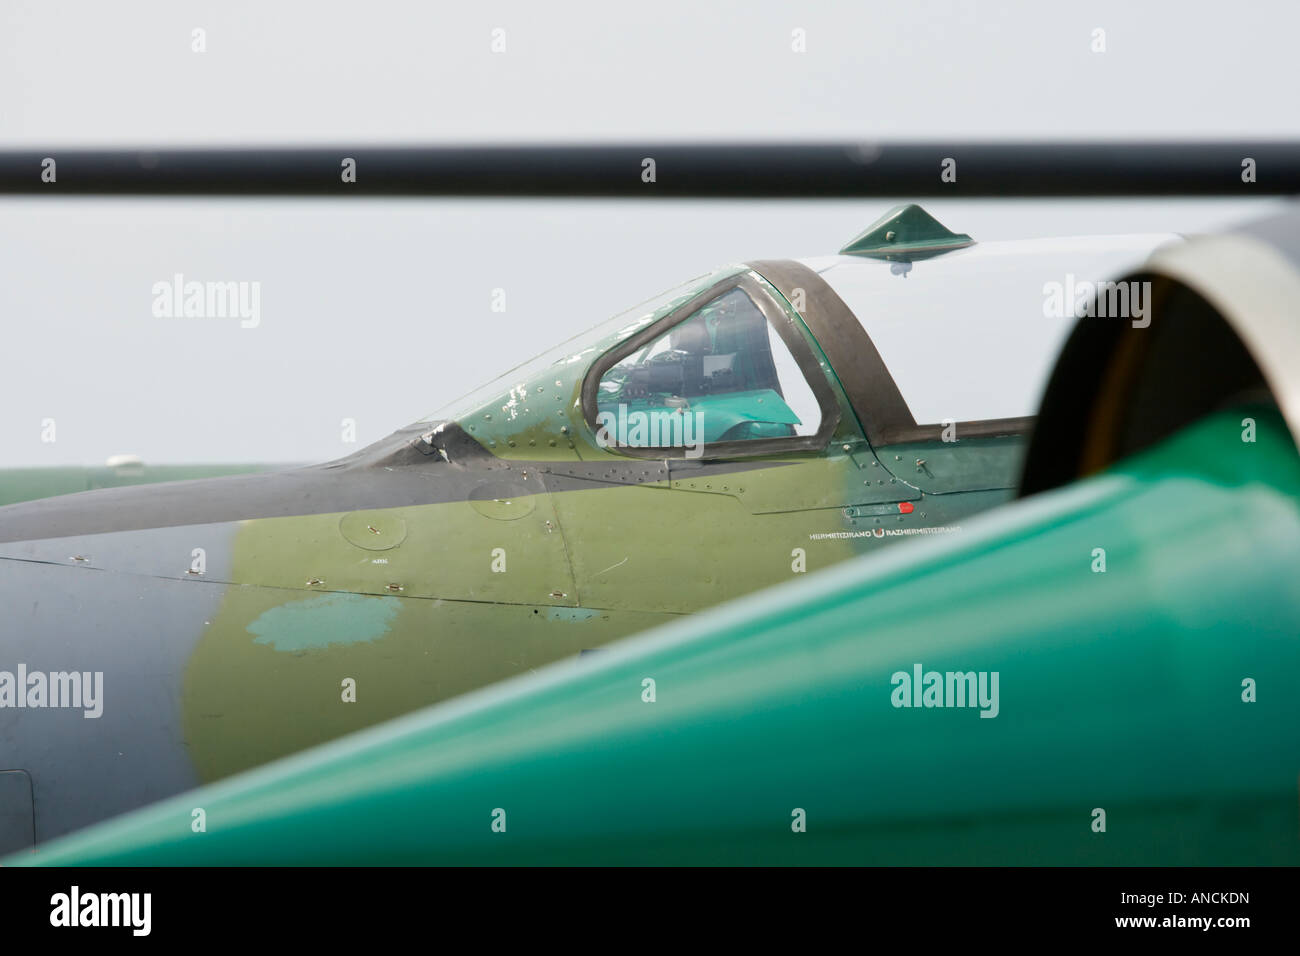 Croatian Air Force MiG-21 BISD fighters nose and cockpit detail Stock Photo